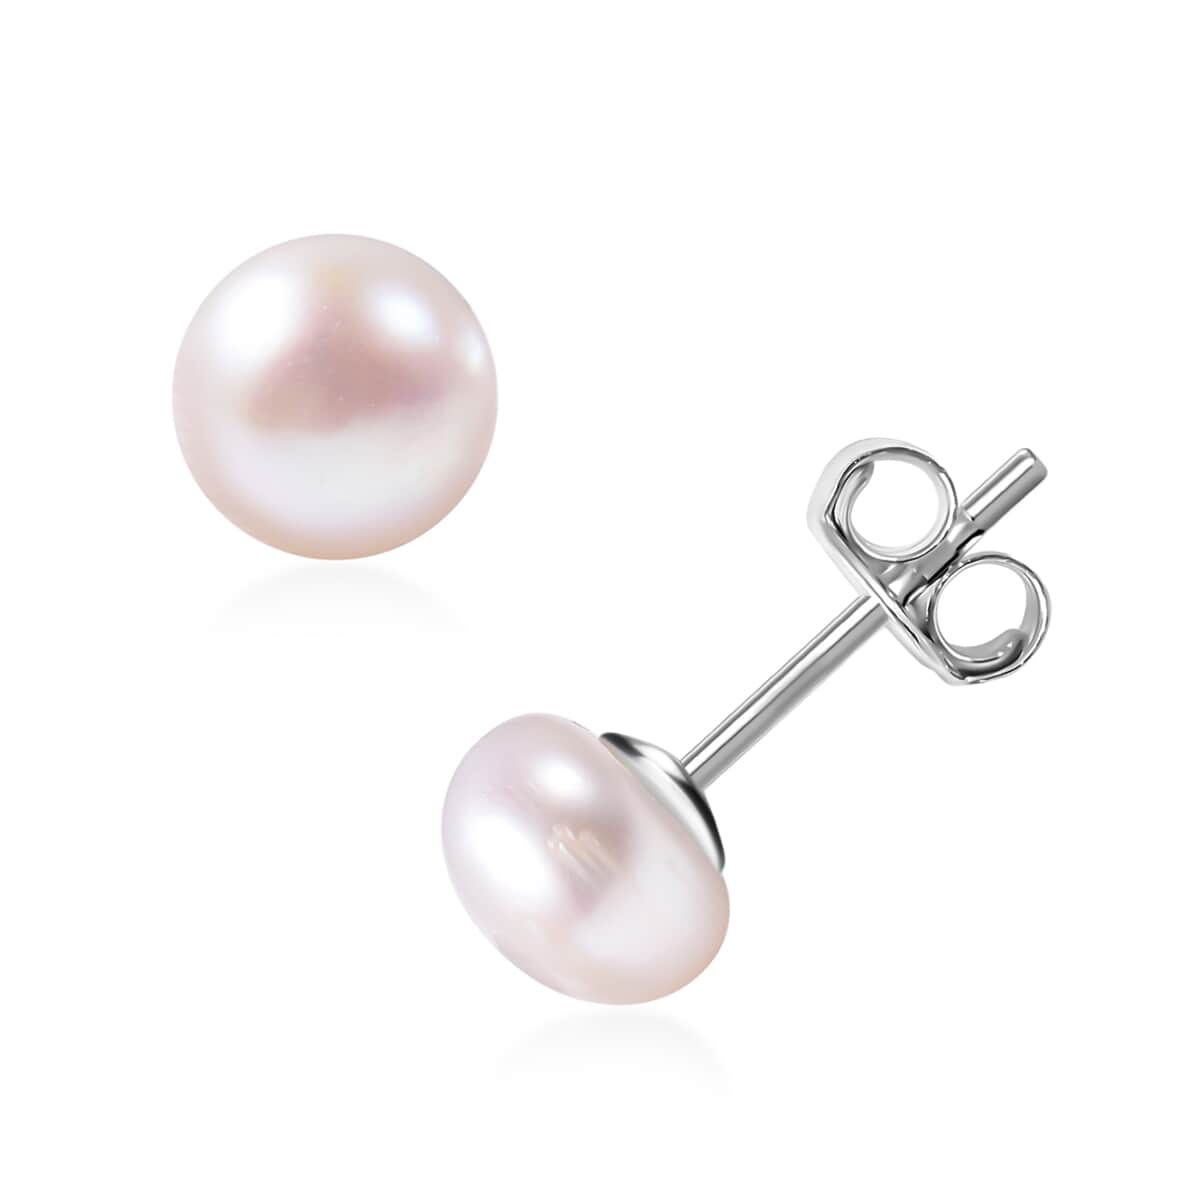 Set of 5 Freshwater Cultured White Pearl Stud Earrings in Stainless Steel| Solitaire Pearl Earrings| Pearl Jewelry For Women image number 3